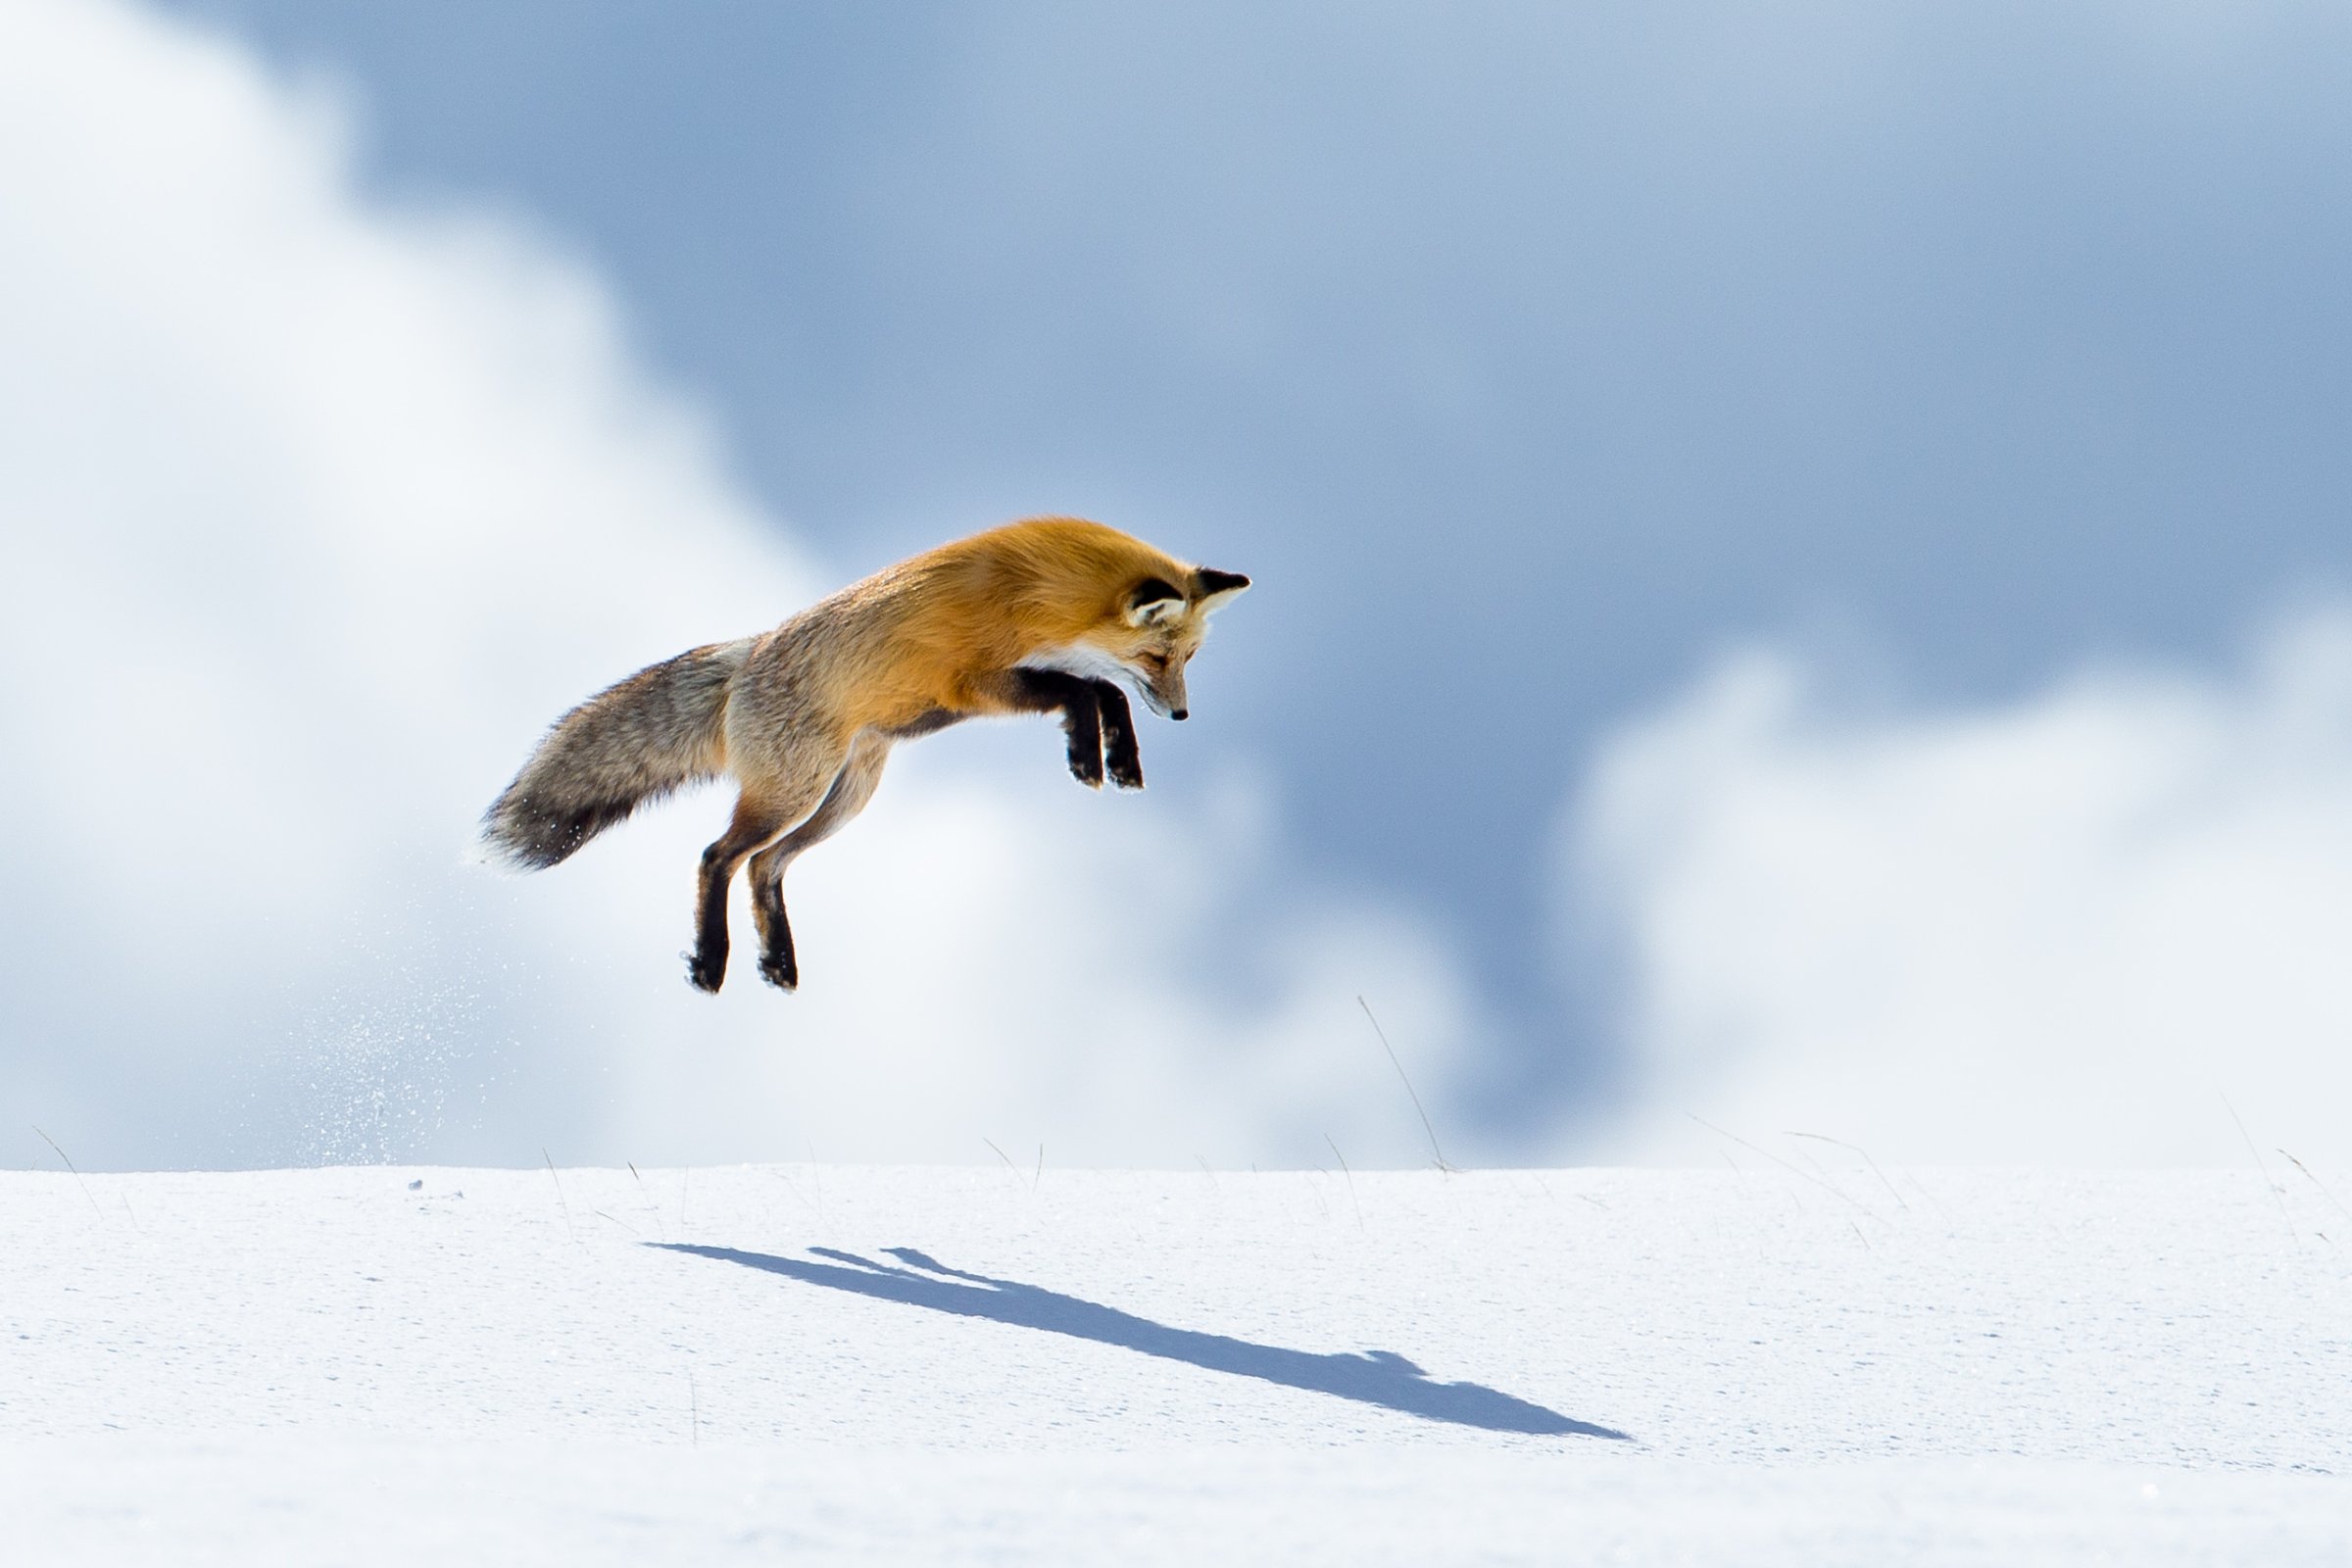 Peter Pan and His Shadow, Fox mousing jump, Yellowstone National Park, 2015.